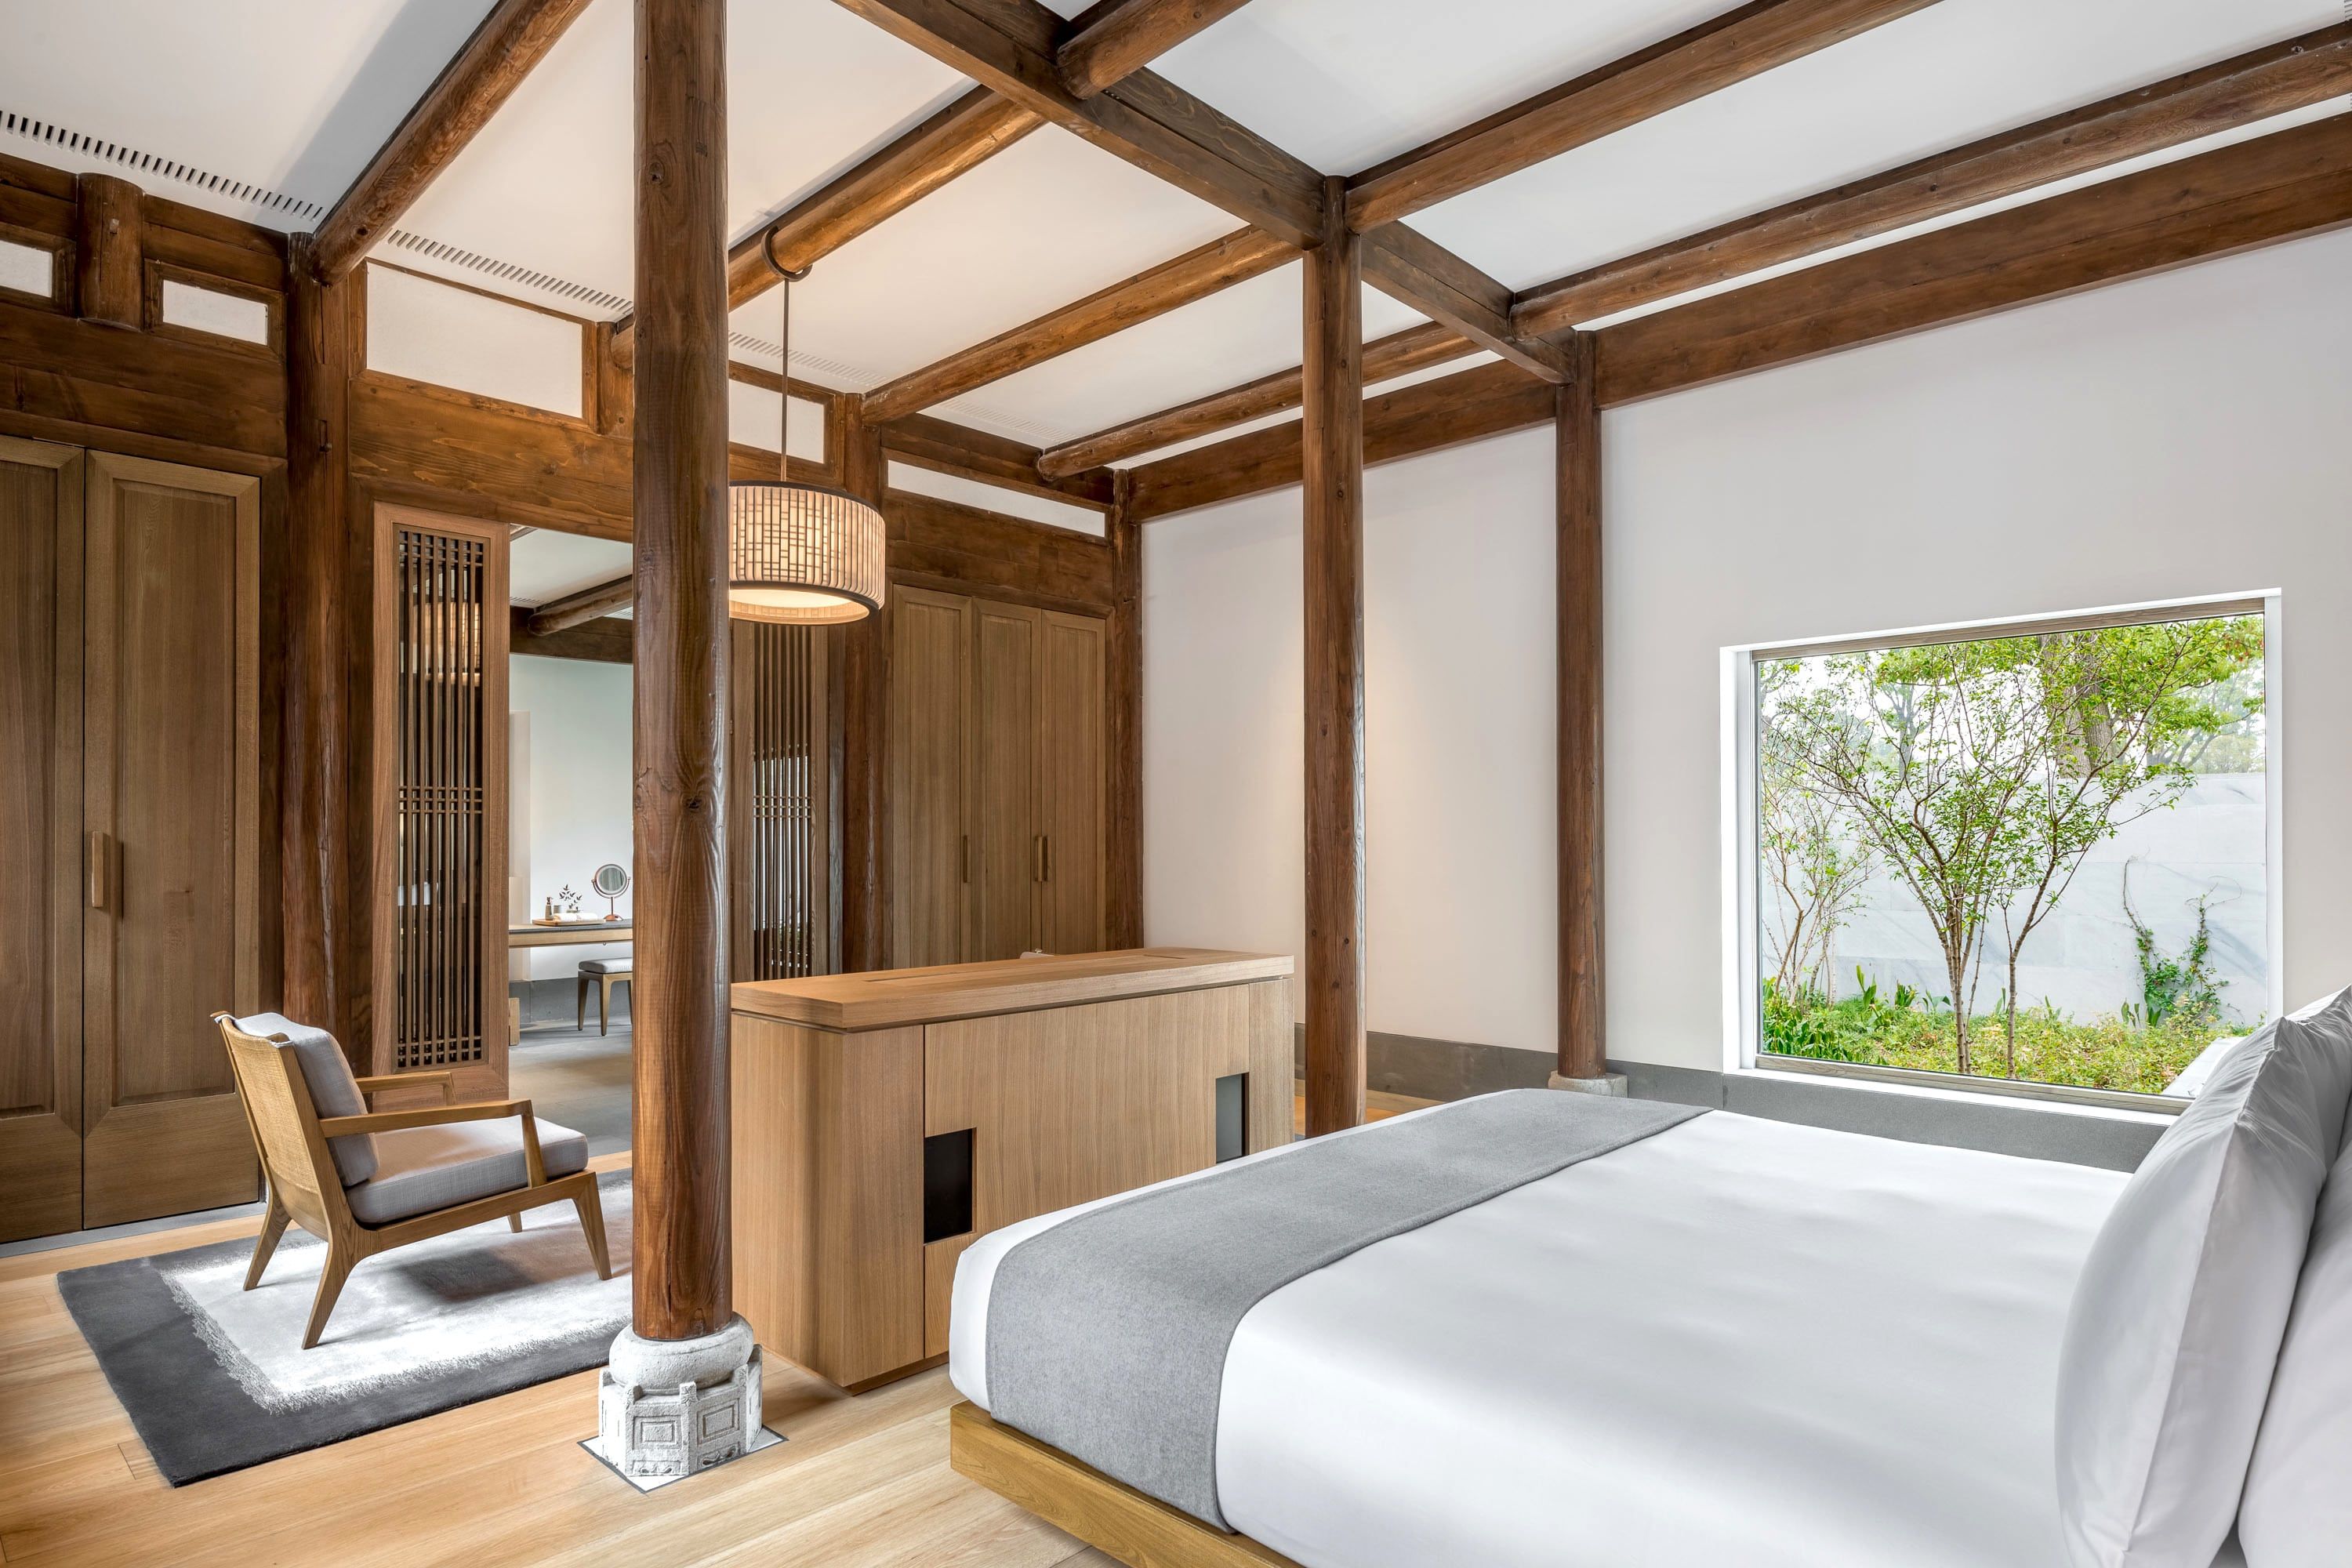 These are 7 of the best Shanghai hotels to visit in 2018